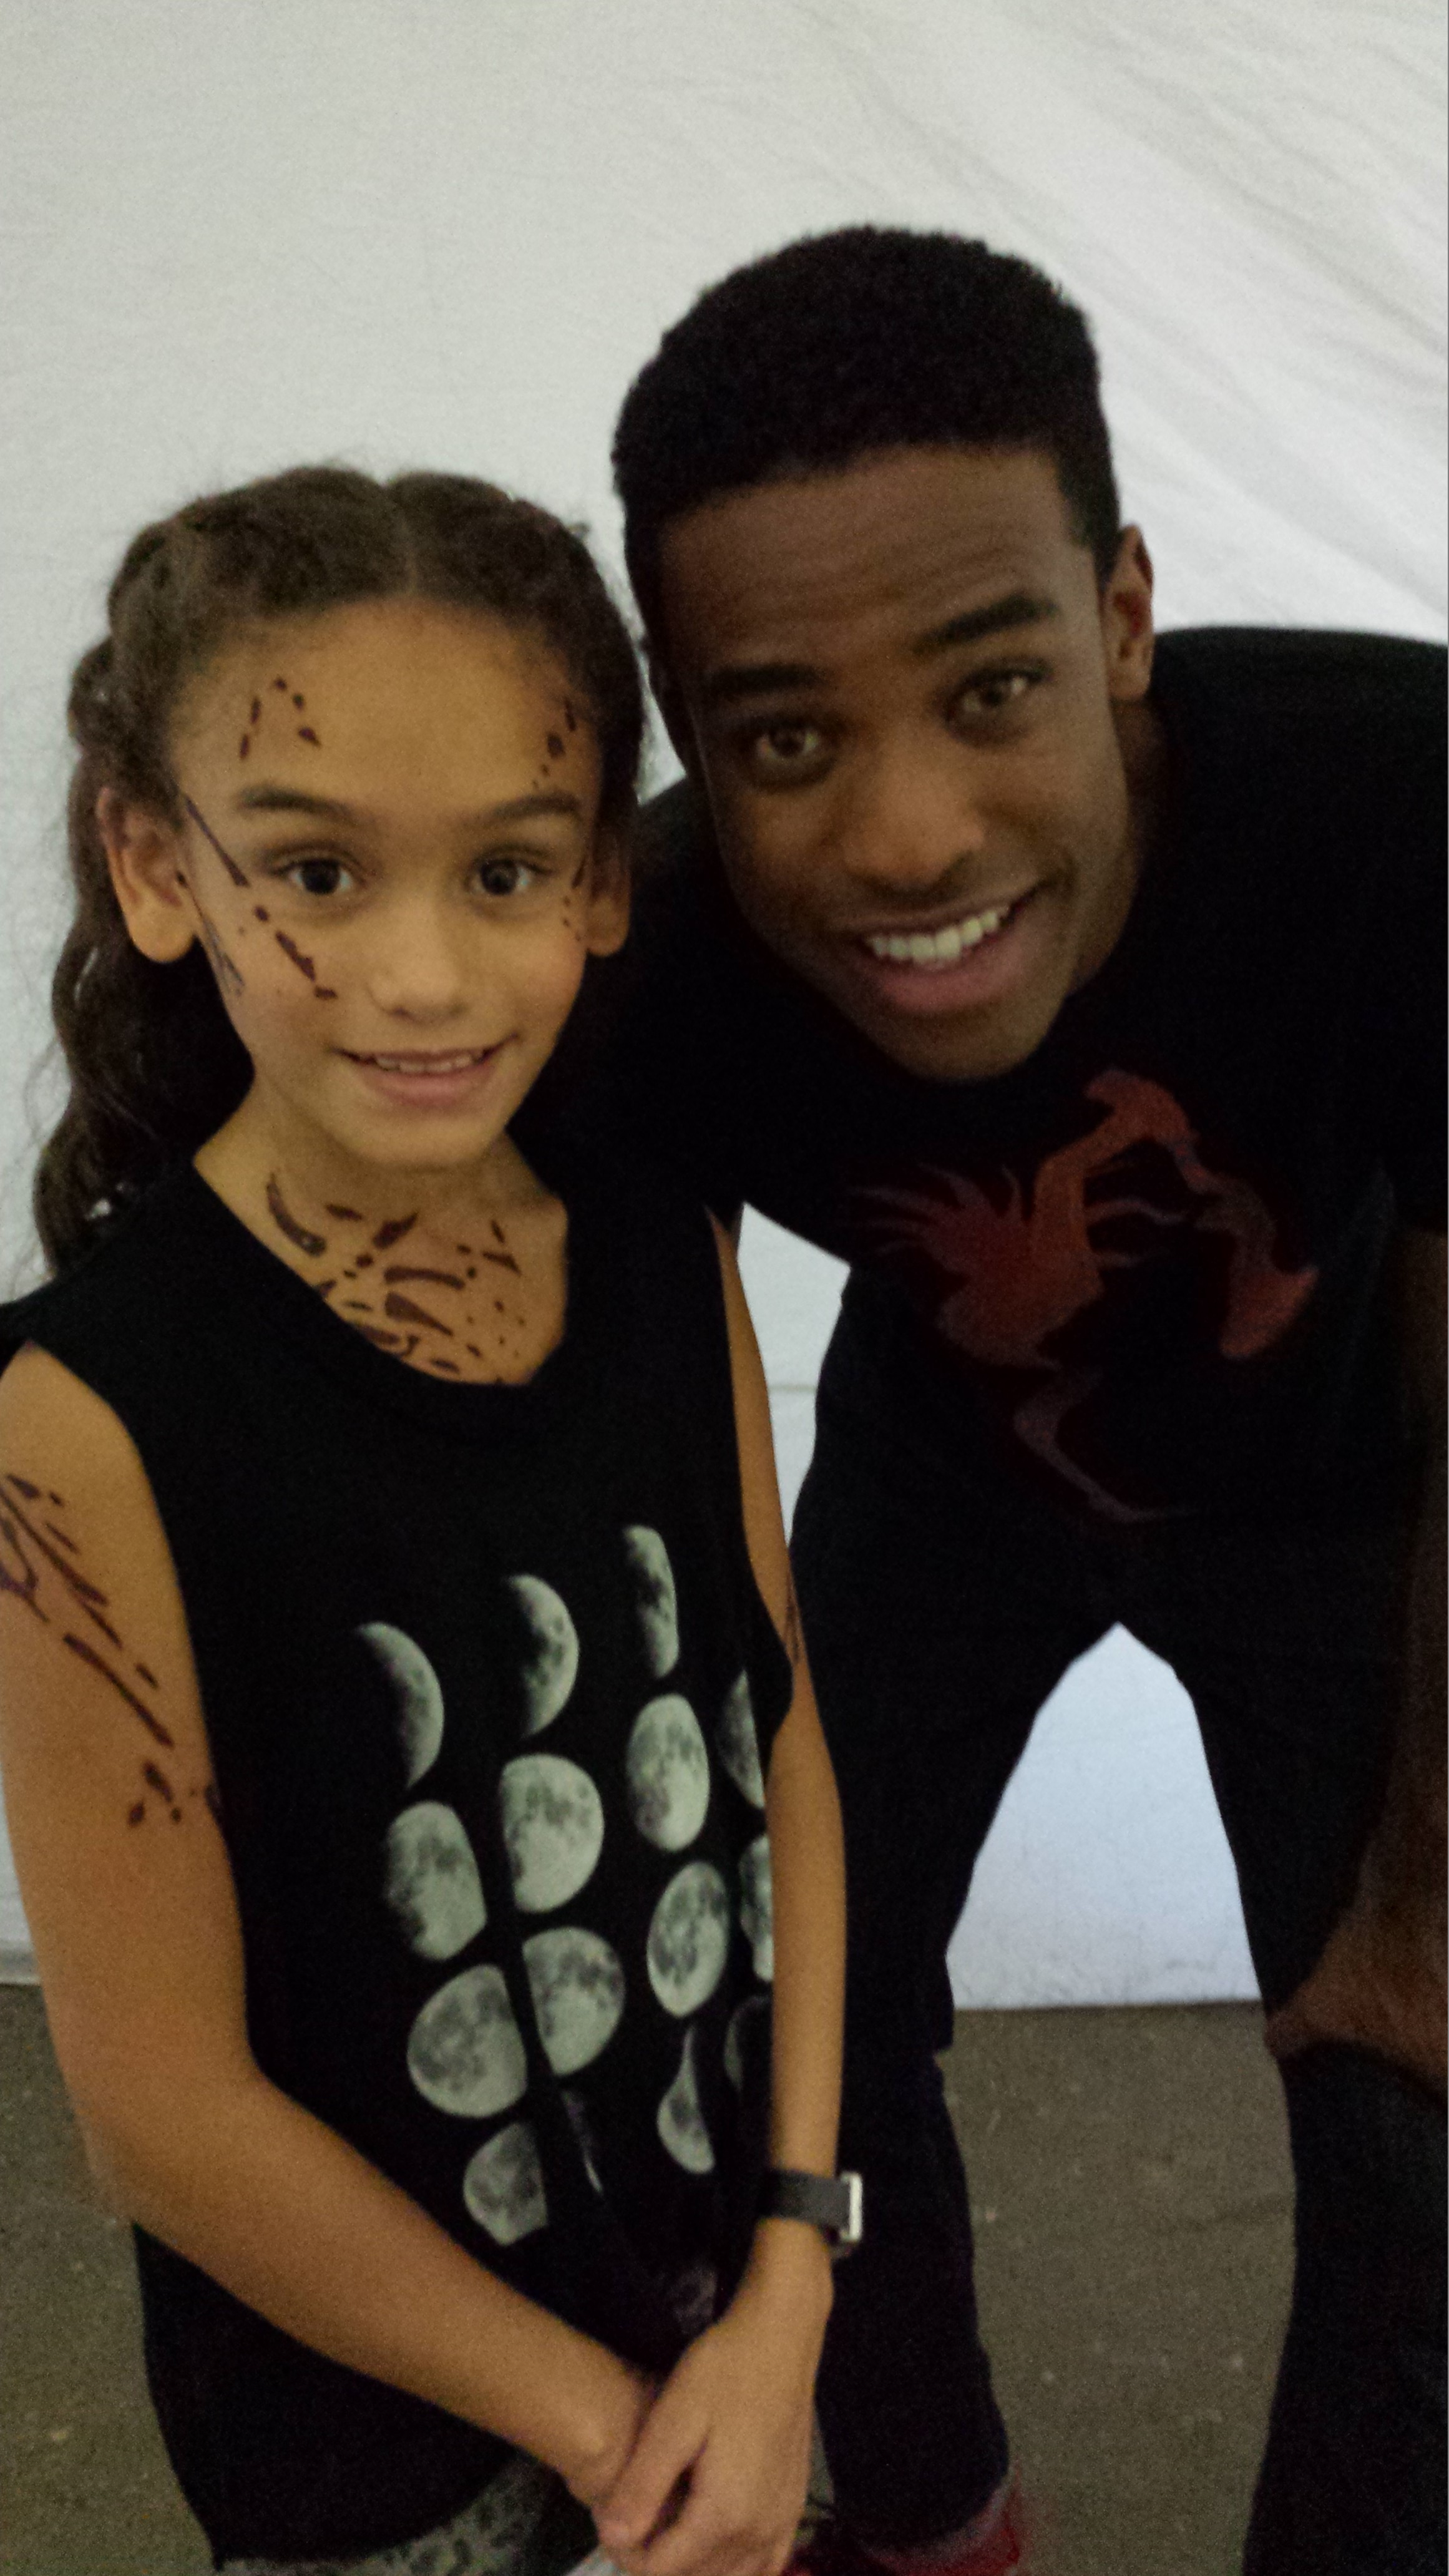 Summer Parker and Titus Makin Jr on set of CW StarCrossed